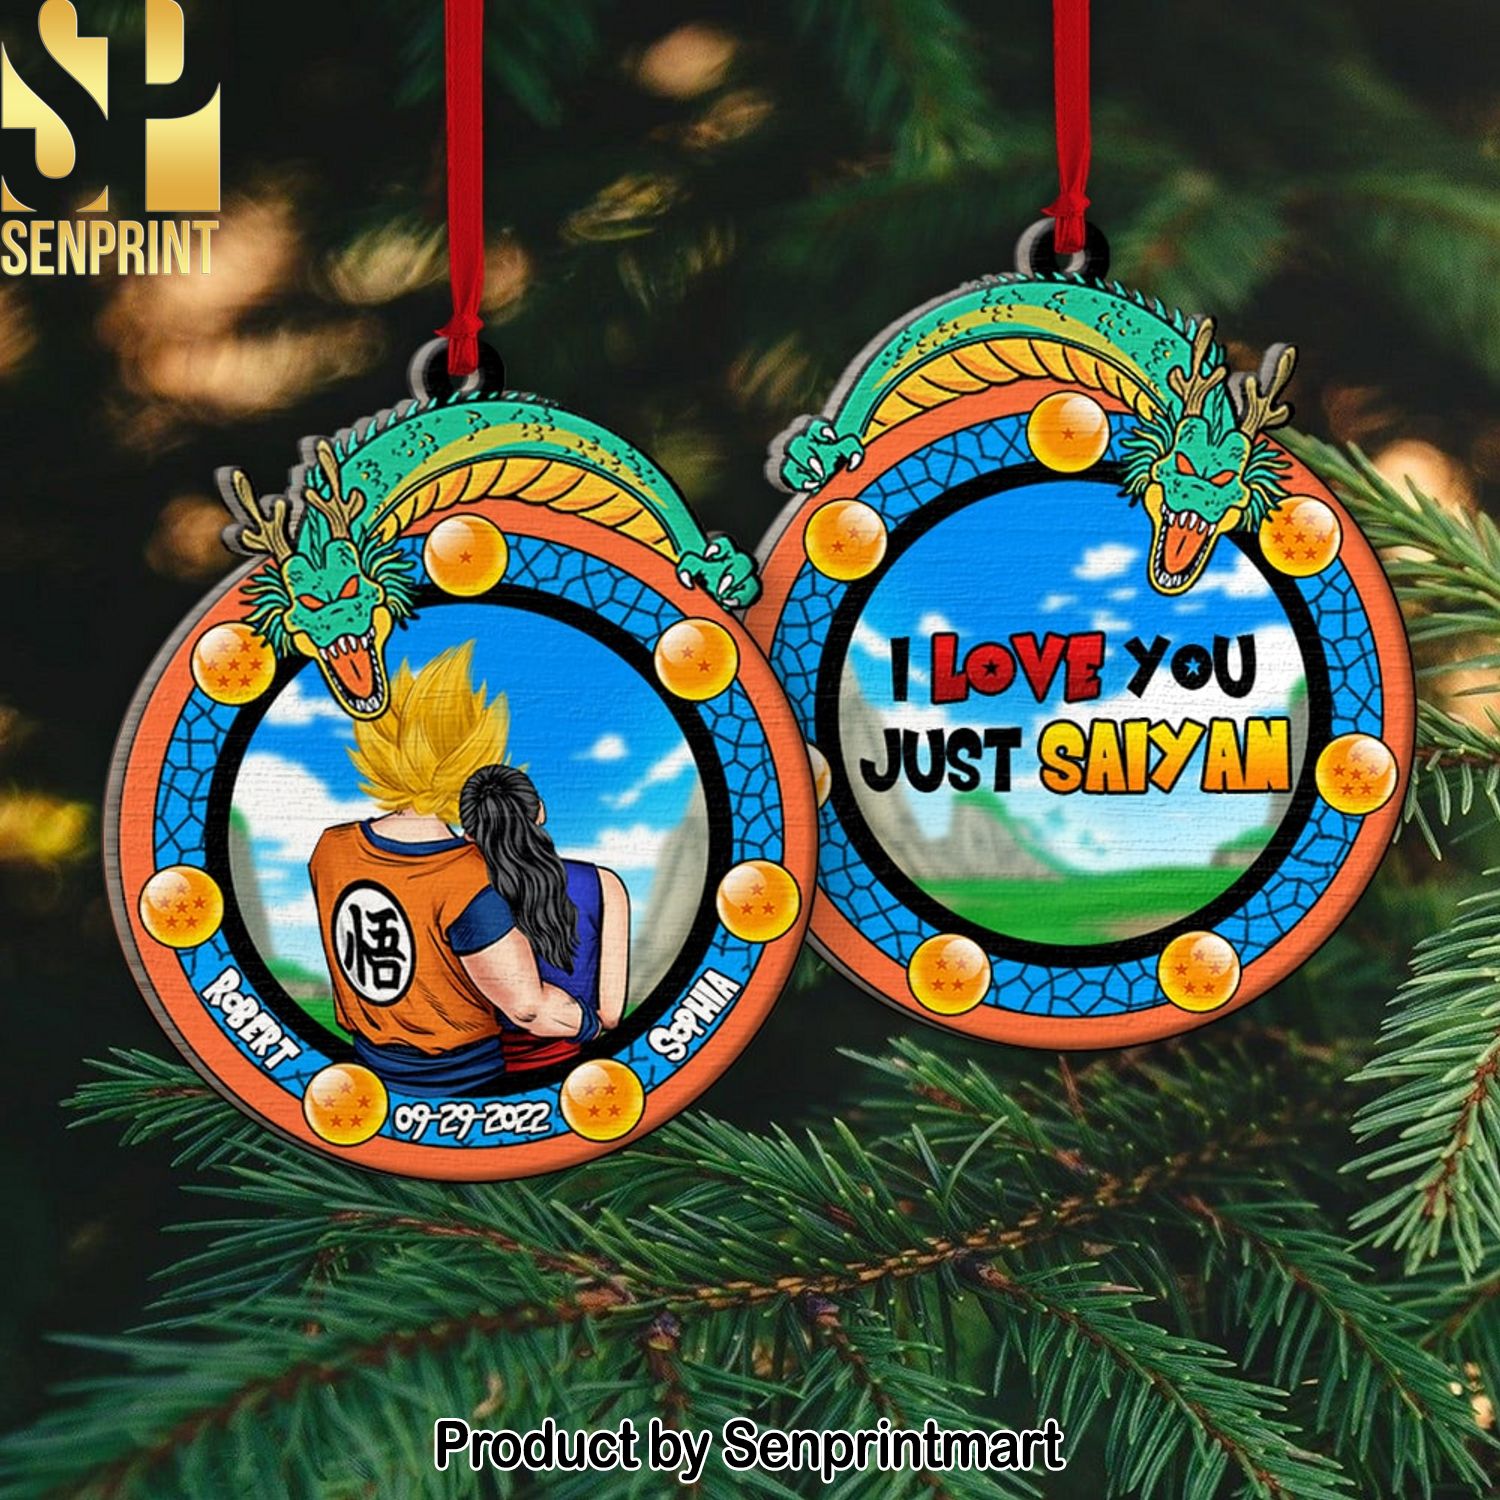 Dragon Balls Z, I Love You, Personalized Ornament, Gift Ideas For Couple